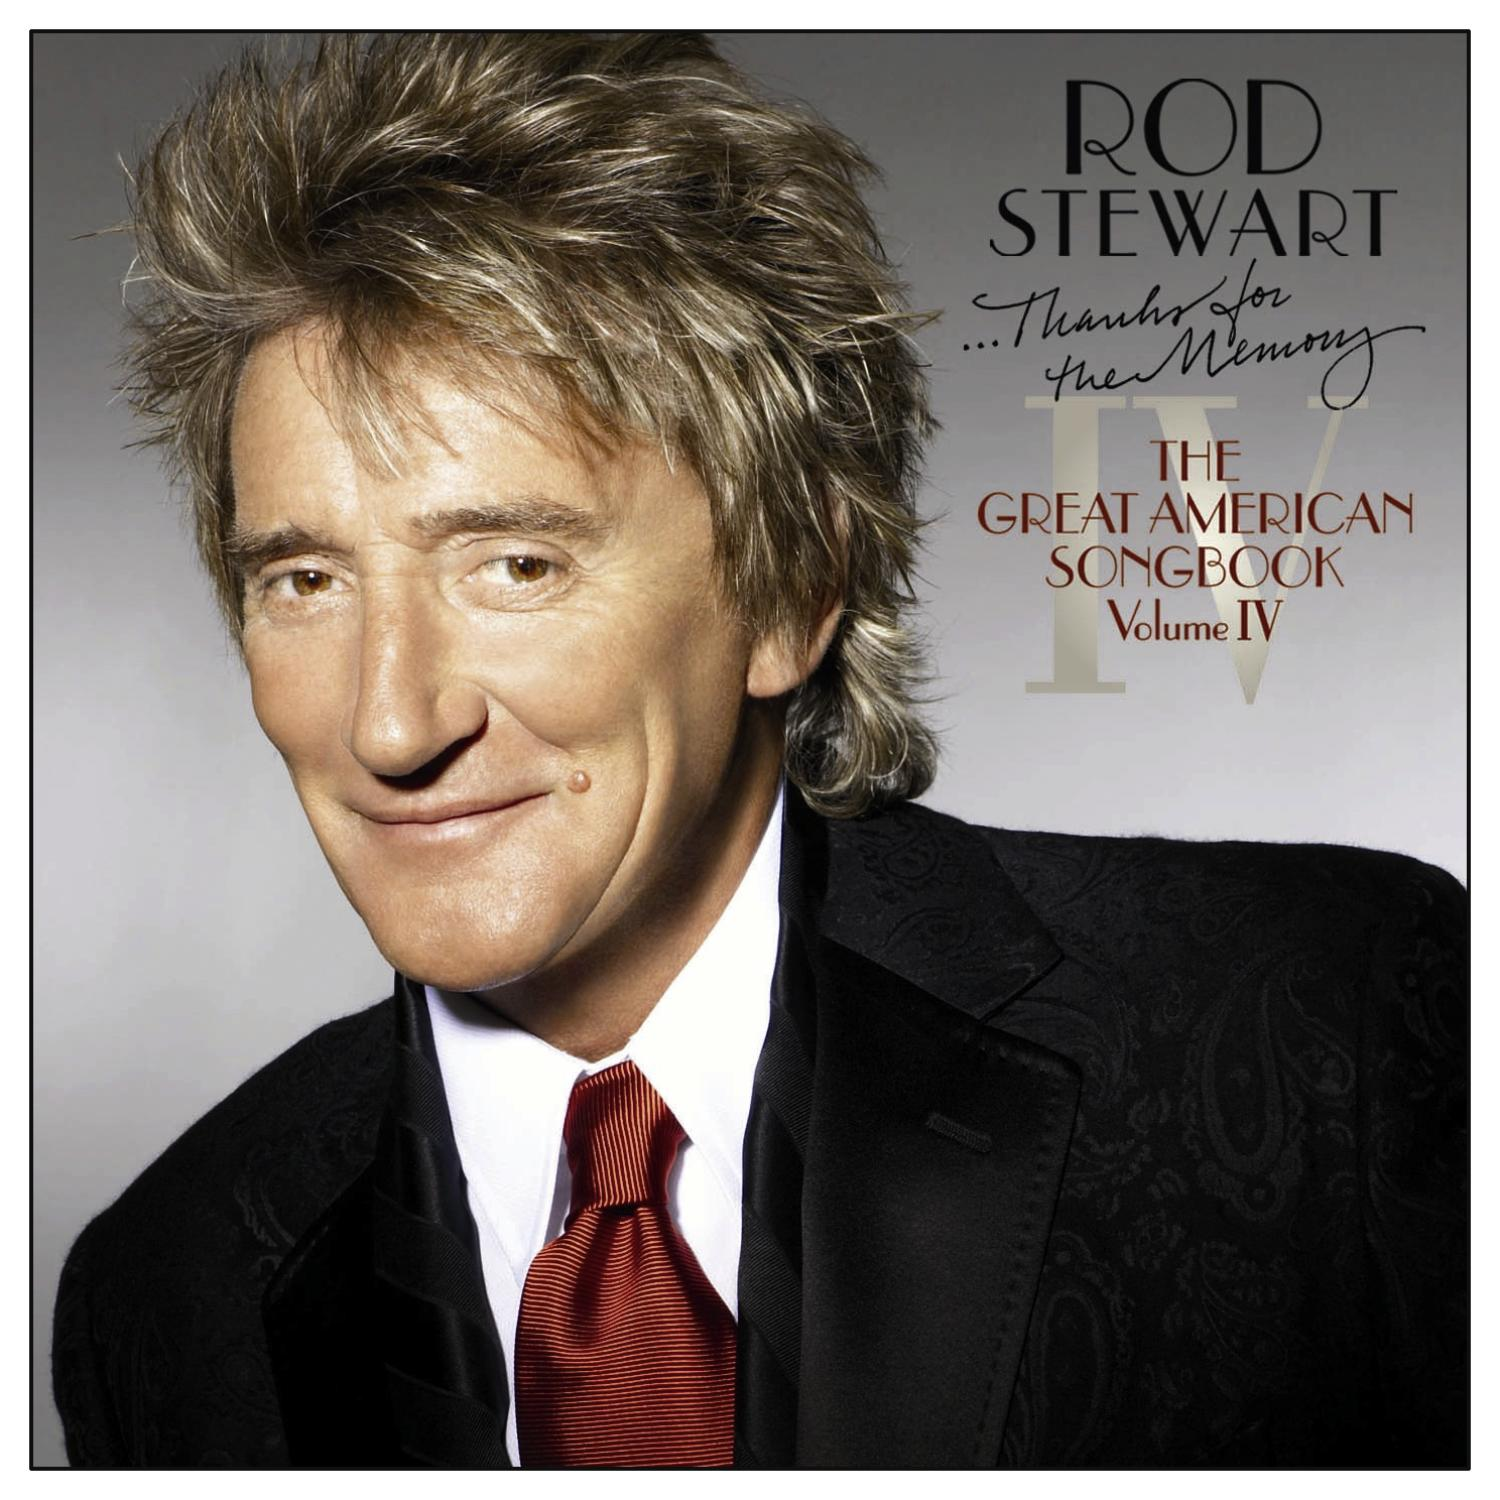 MEMORY SONGB.4 GREAT THE THE Rod THANKS - - - FOR Stewart AMERICAN (CD)